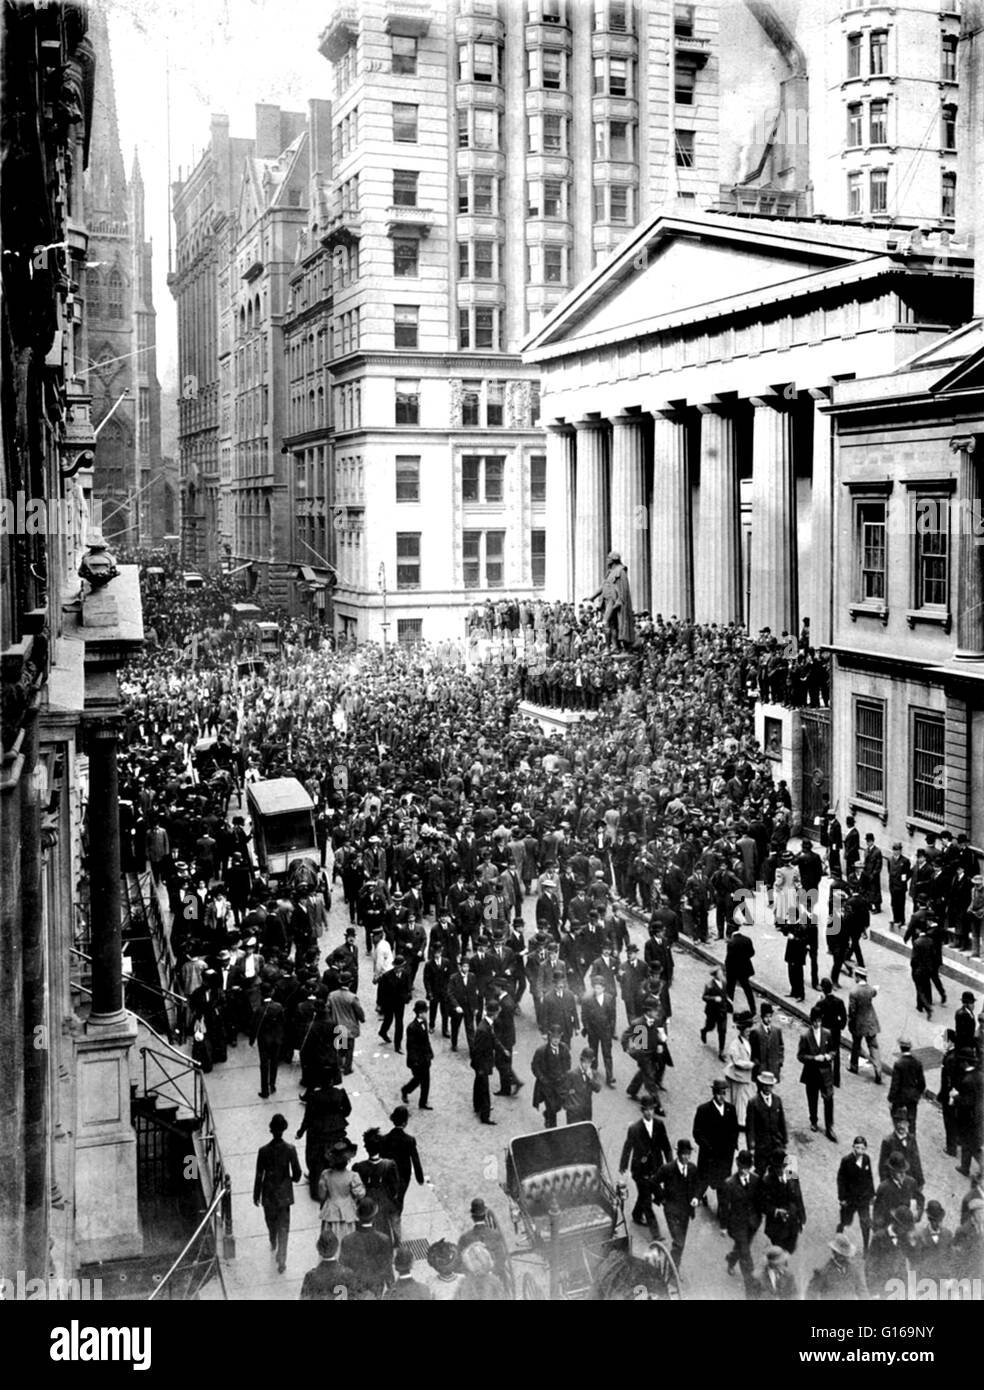 The Panic of 1907 was a financial crisis that occurred when the New York Stock Exchange fell almost 50% from its peak the previous year. It occurred during a time of economic recession, and there were numerous runs on banks and trust companies. The panic was triggered by the failed attempt in October 1907 to corner the market on stock of the United Copper Company. When this bid failed, banks that had lent money to the cornering scheme suffered runs that later spread to affiliated banks and trusts. On October 22, the Knickerbocker faced a classic bank run. From the bank's opening, the crowd gre Stock Photo